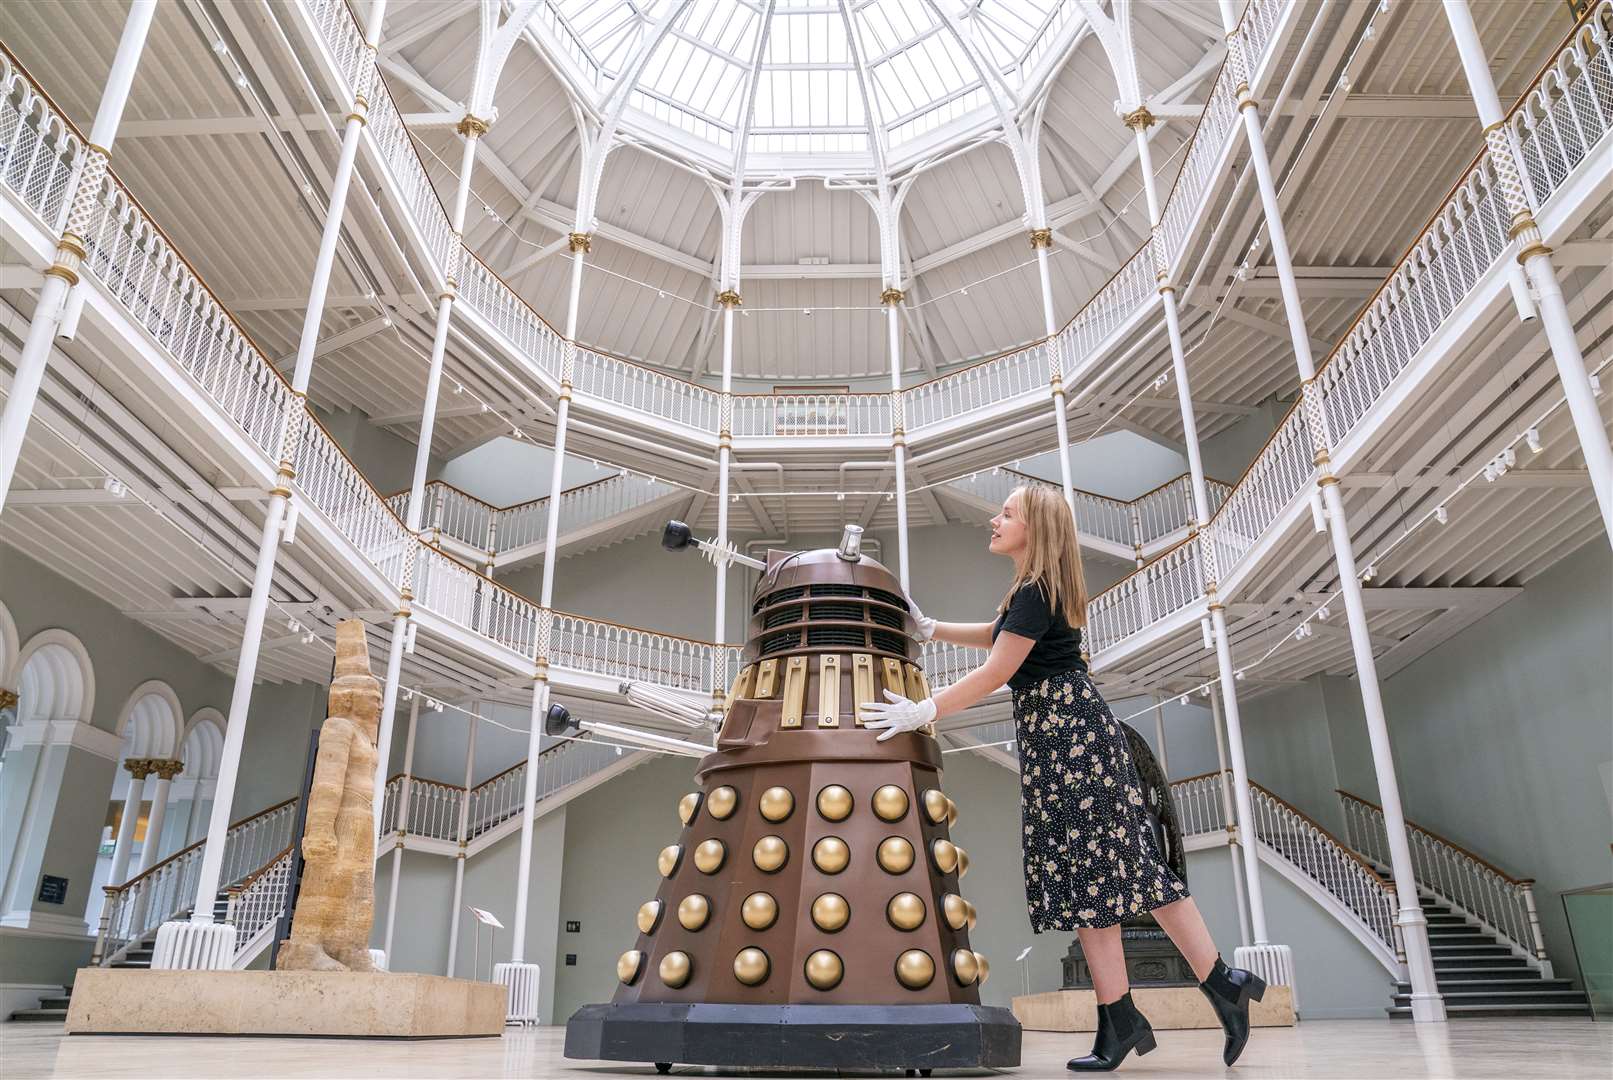 A member of staff pushed a Dalek into place for an exhibition at the National Museum of Scotland in Edinburgh in July (Jane Barlow/PA)